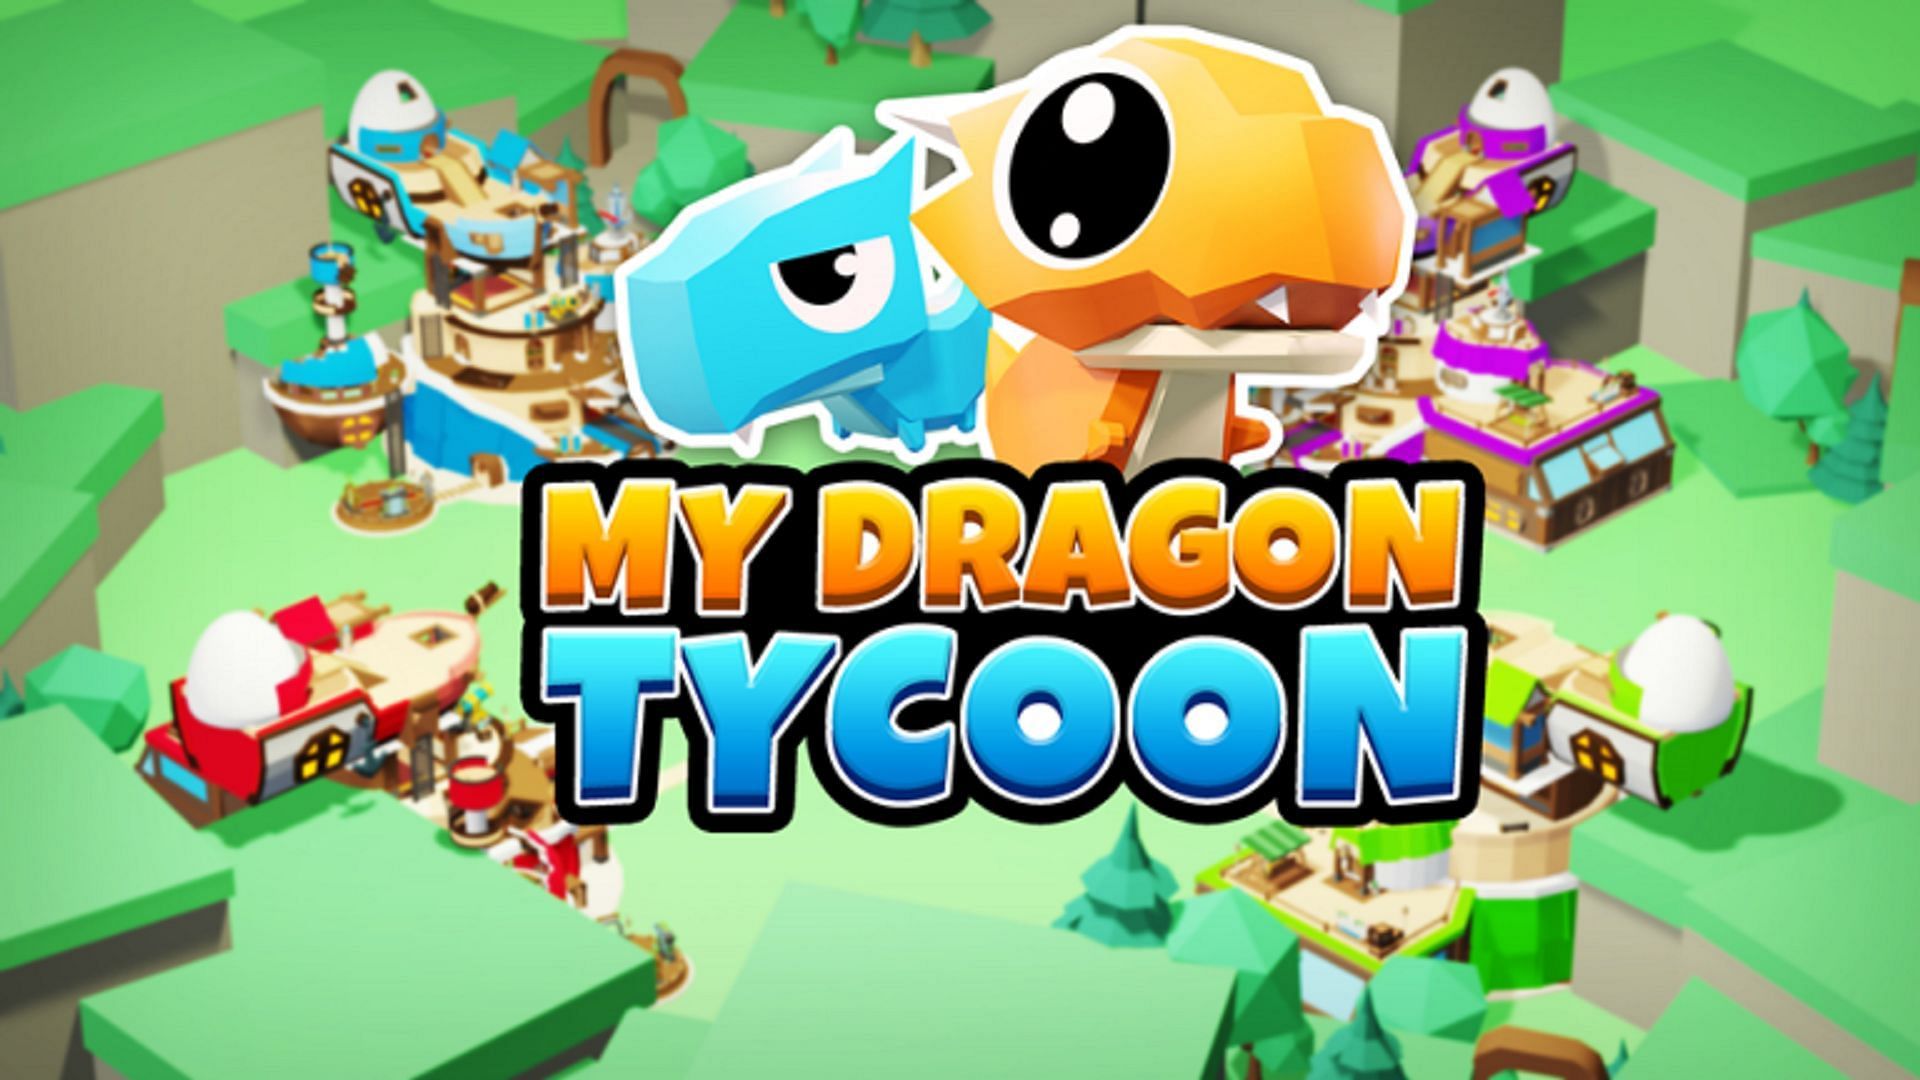 Earn free gifts and cash with My Dragon Tycoon codes (Image via Roblox)